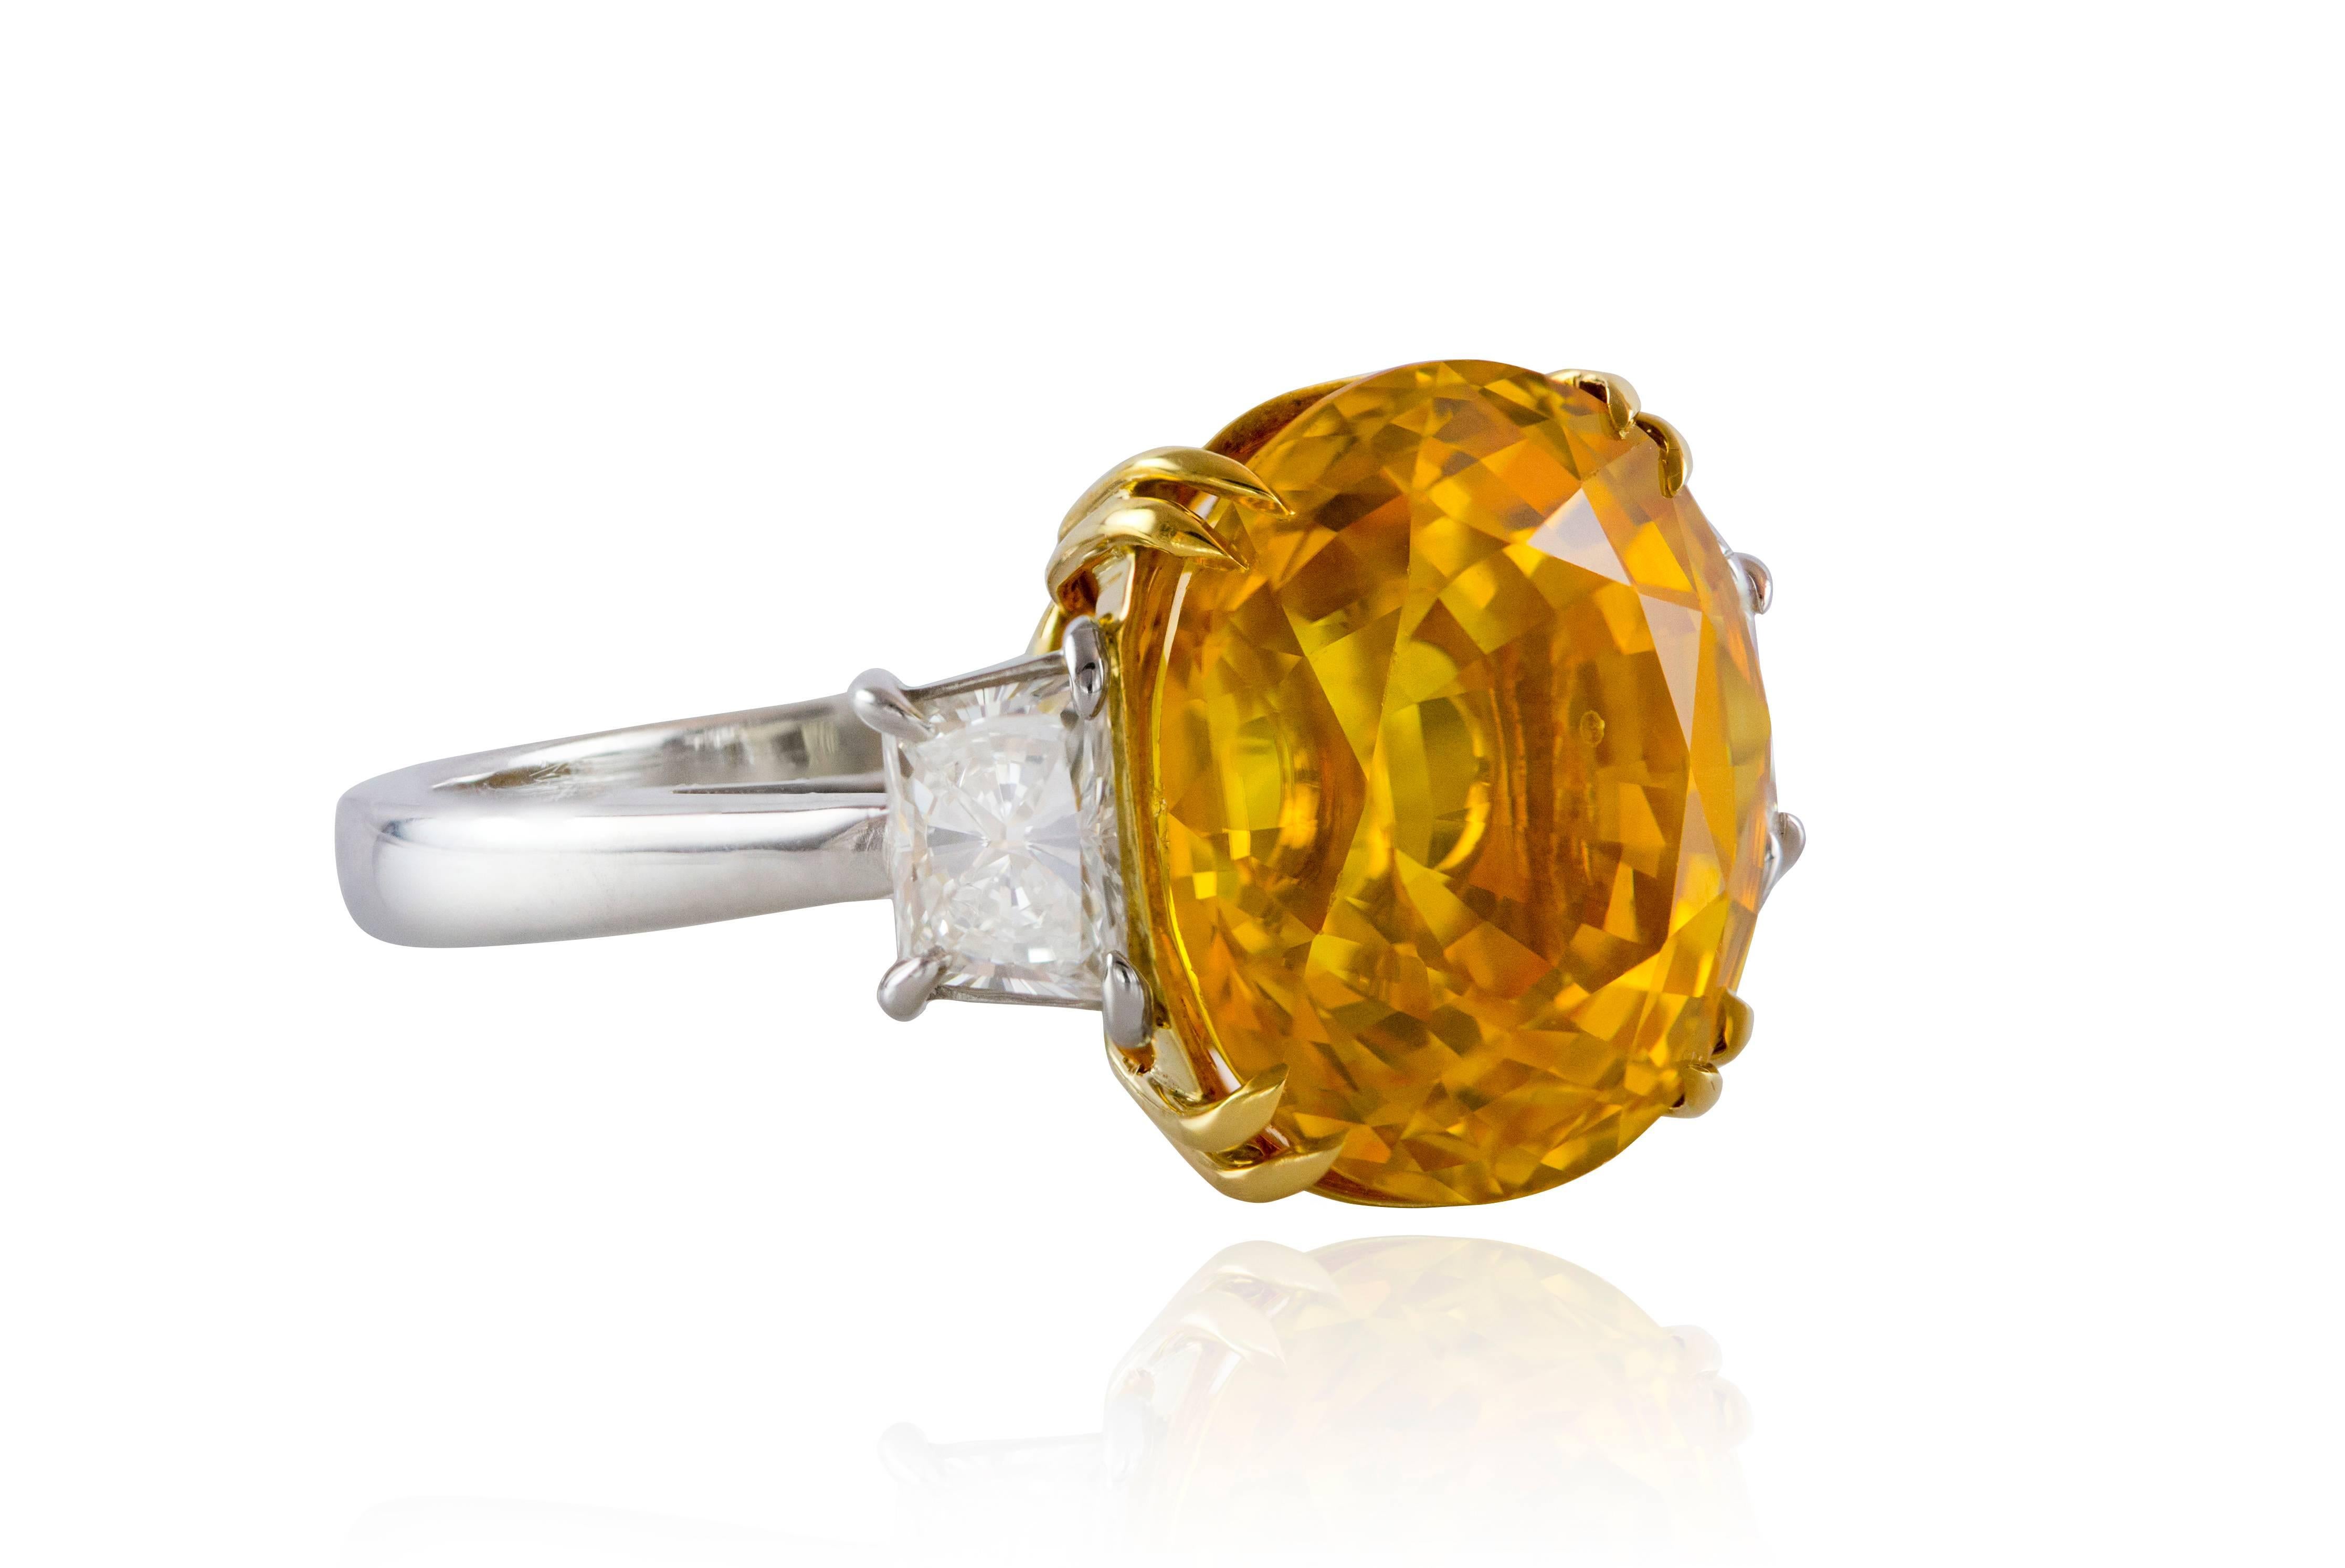 Features oval-shape natural yellow sapphire weighing 12.28 carat. The sapphire is certified by GIA and has indications of heating. The sapphire accented by trapezoid diamond on either side. Total diamond weigh 0.95 carat. The ring made of platinum